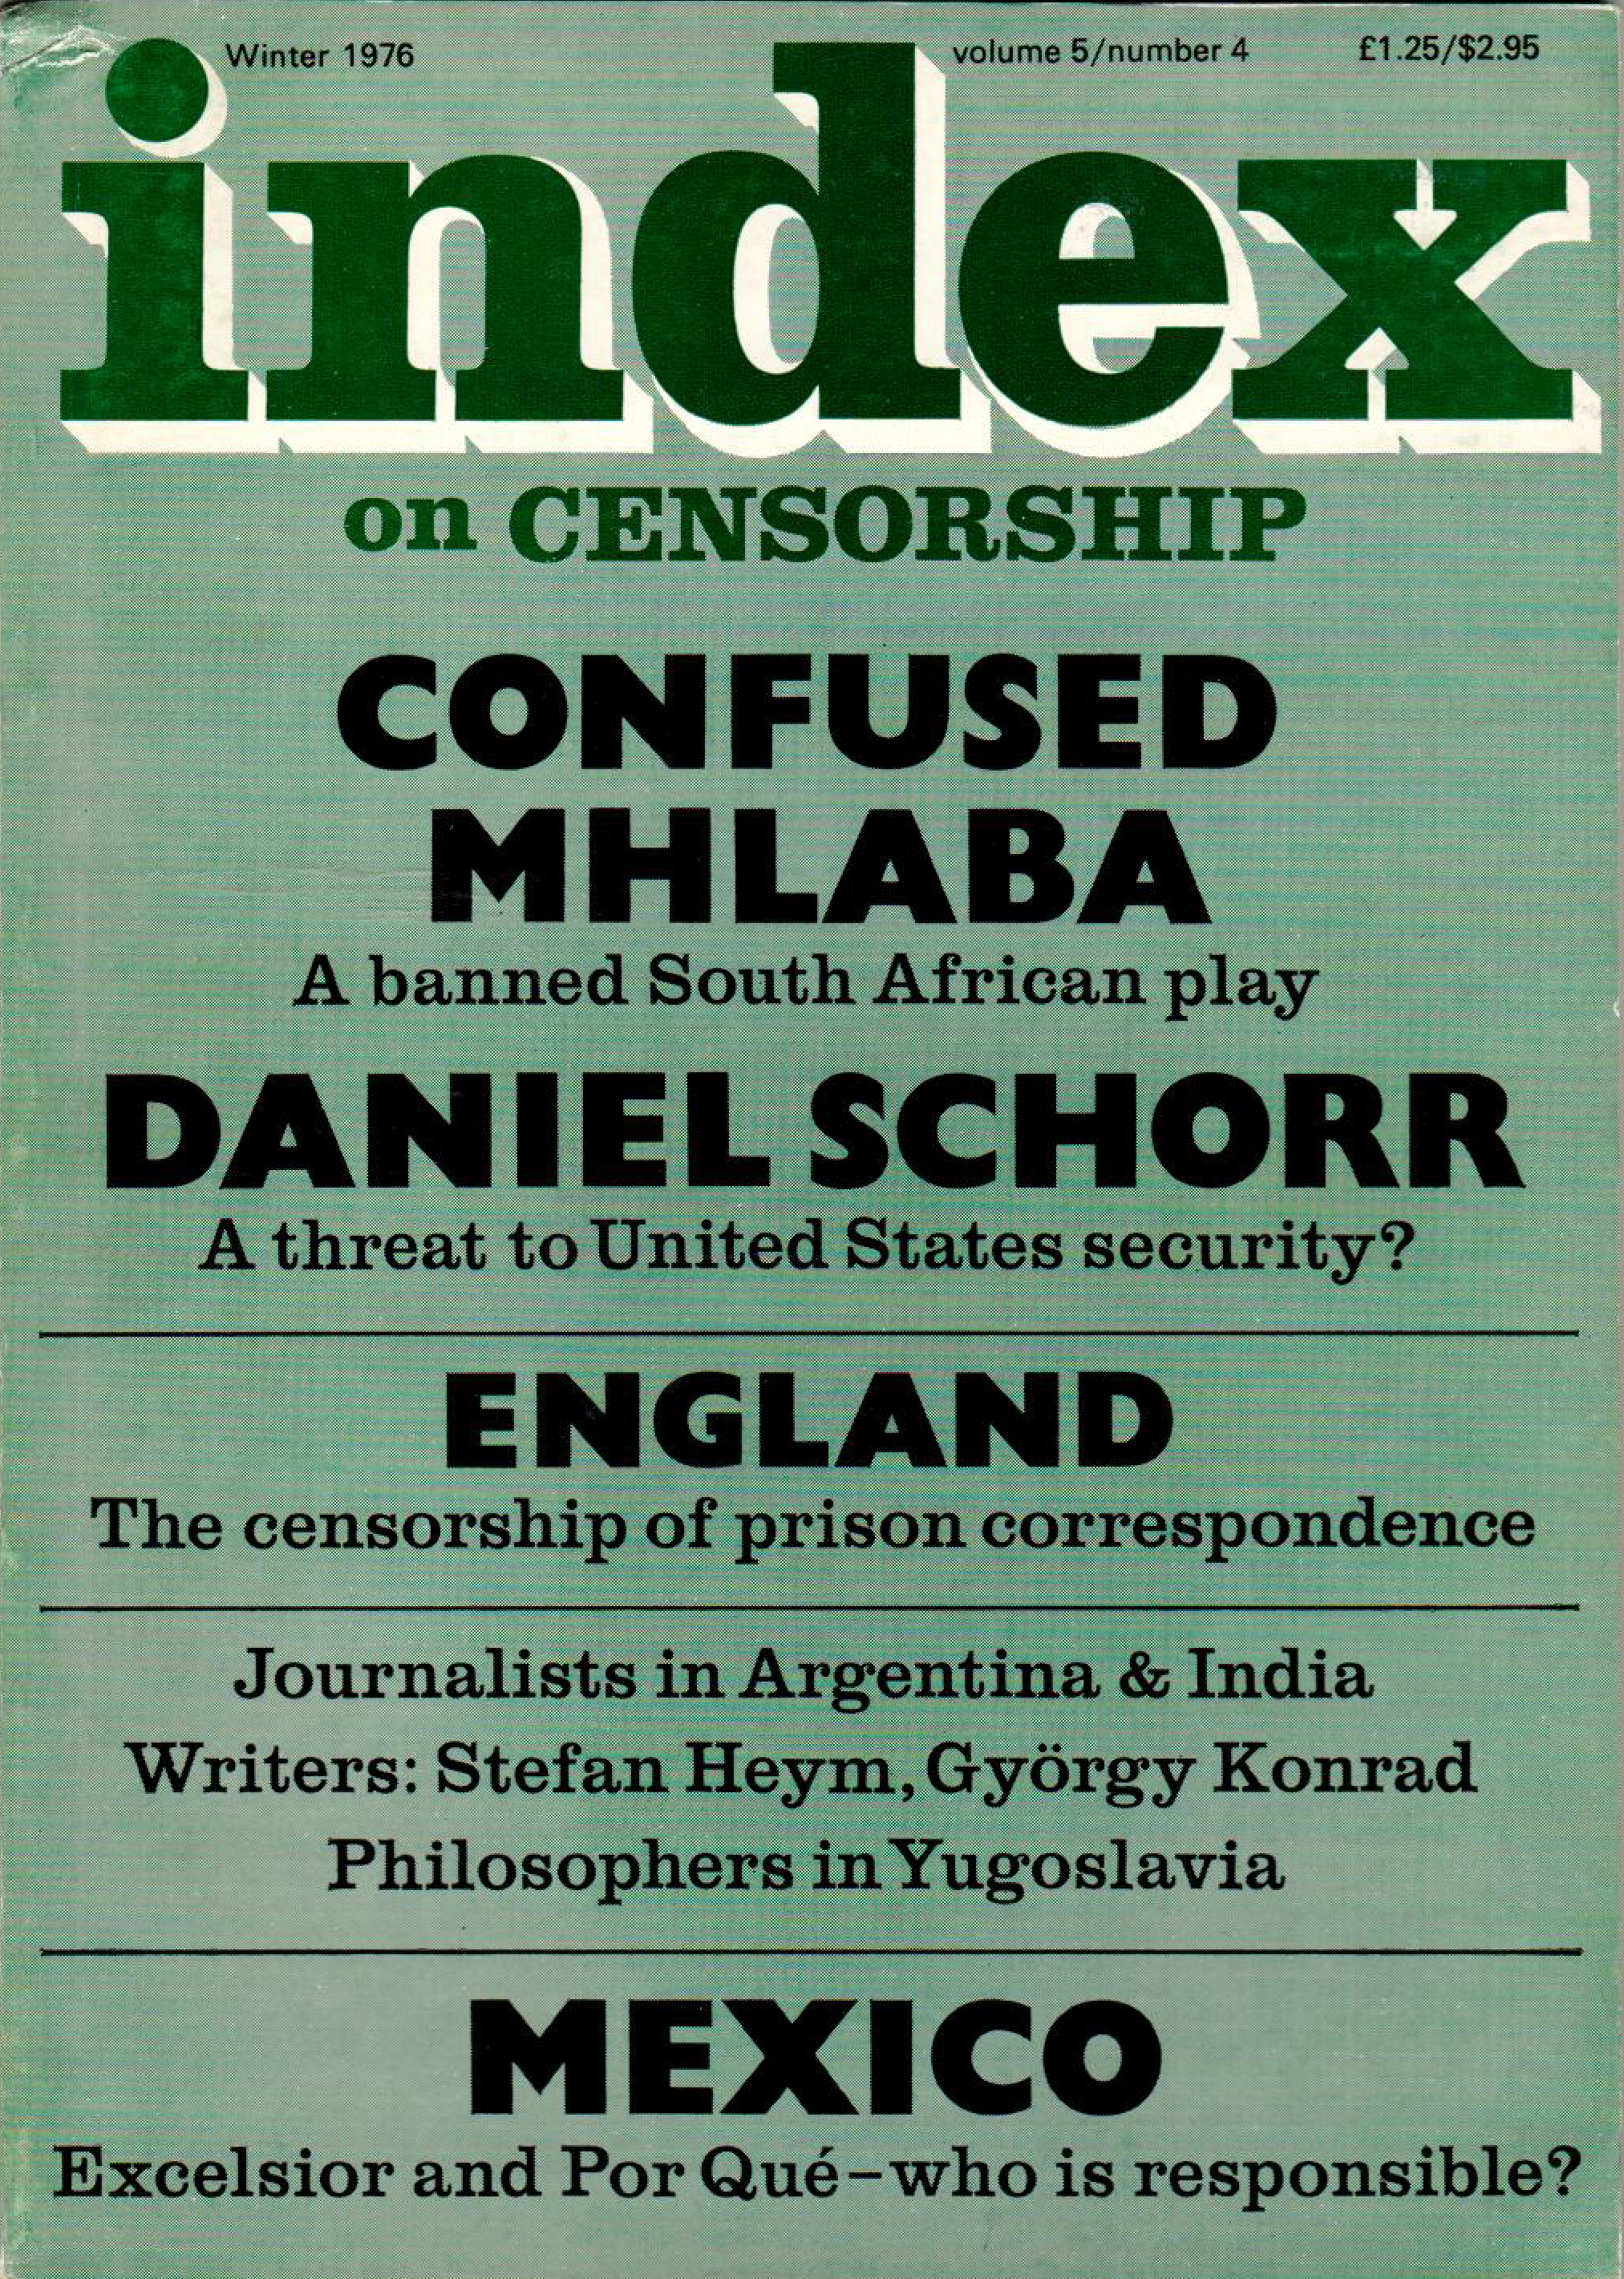 Confused Mhlaba: a banned South African play, the Winter 1976 issue of Index on Censorship magazine